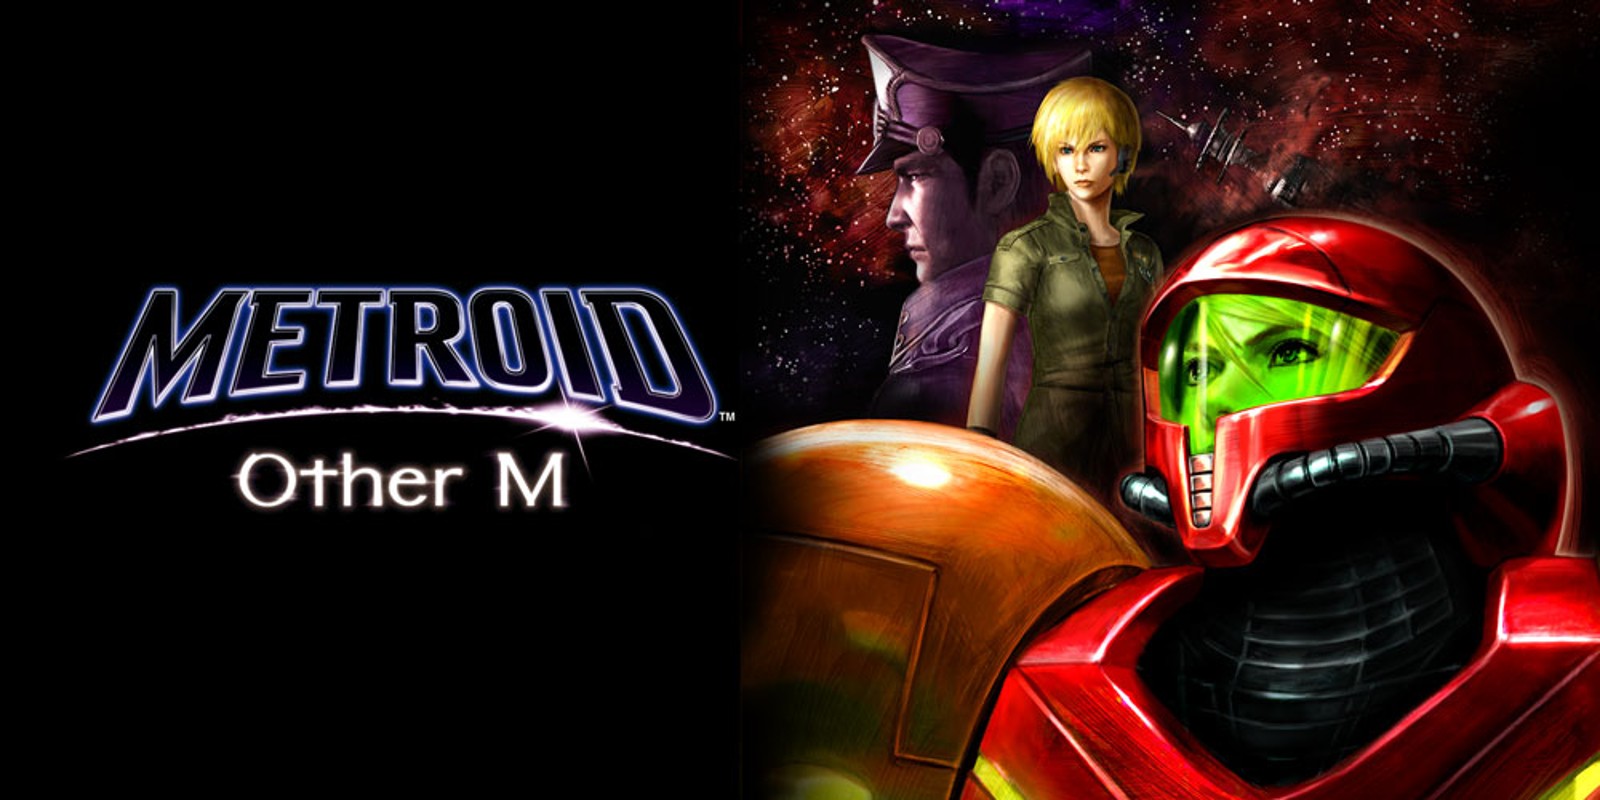 Fascinating Facts About Metroid - The Game That Nearly Killed the Franchise